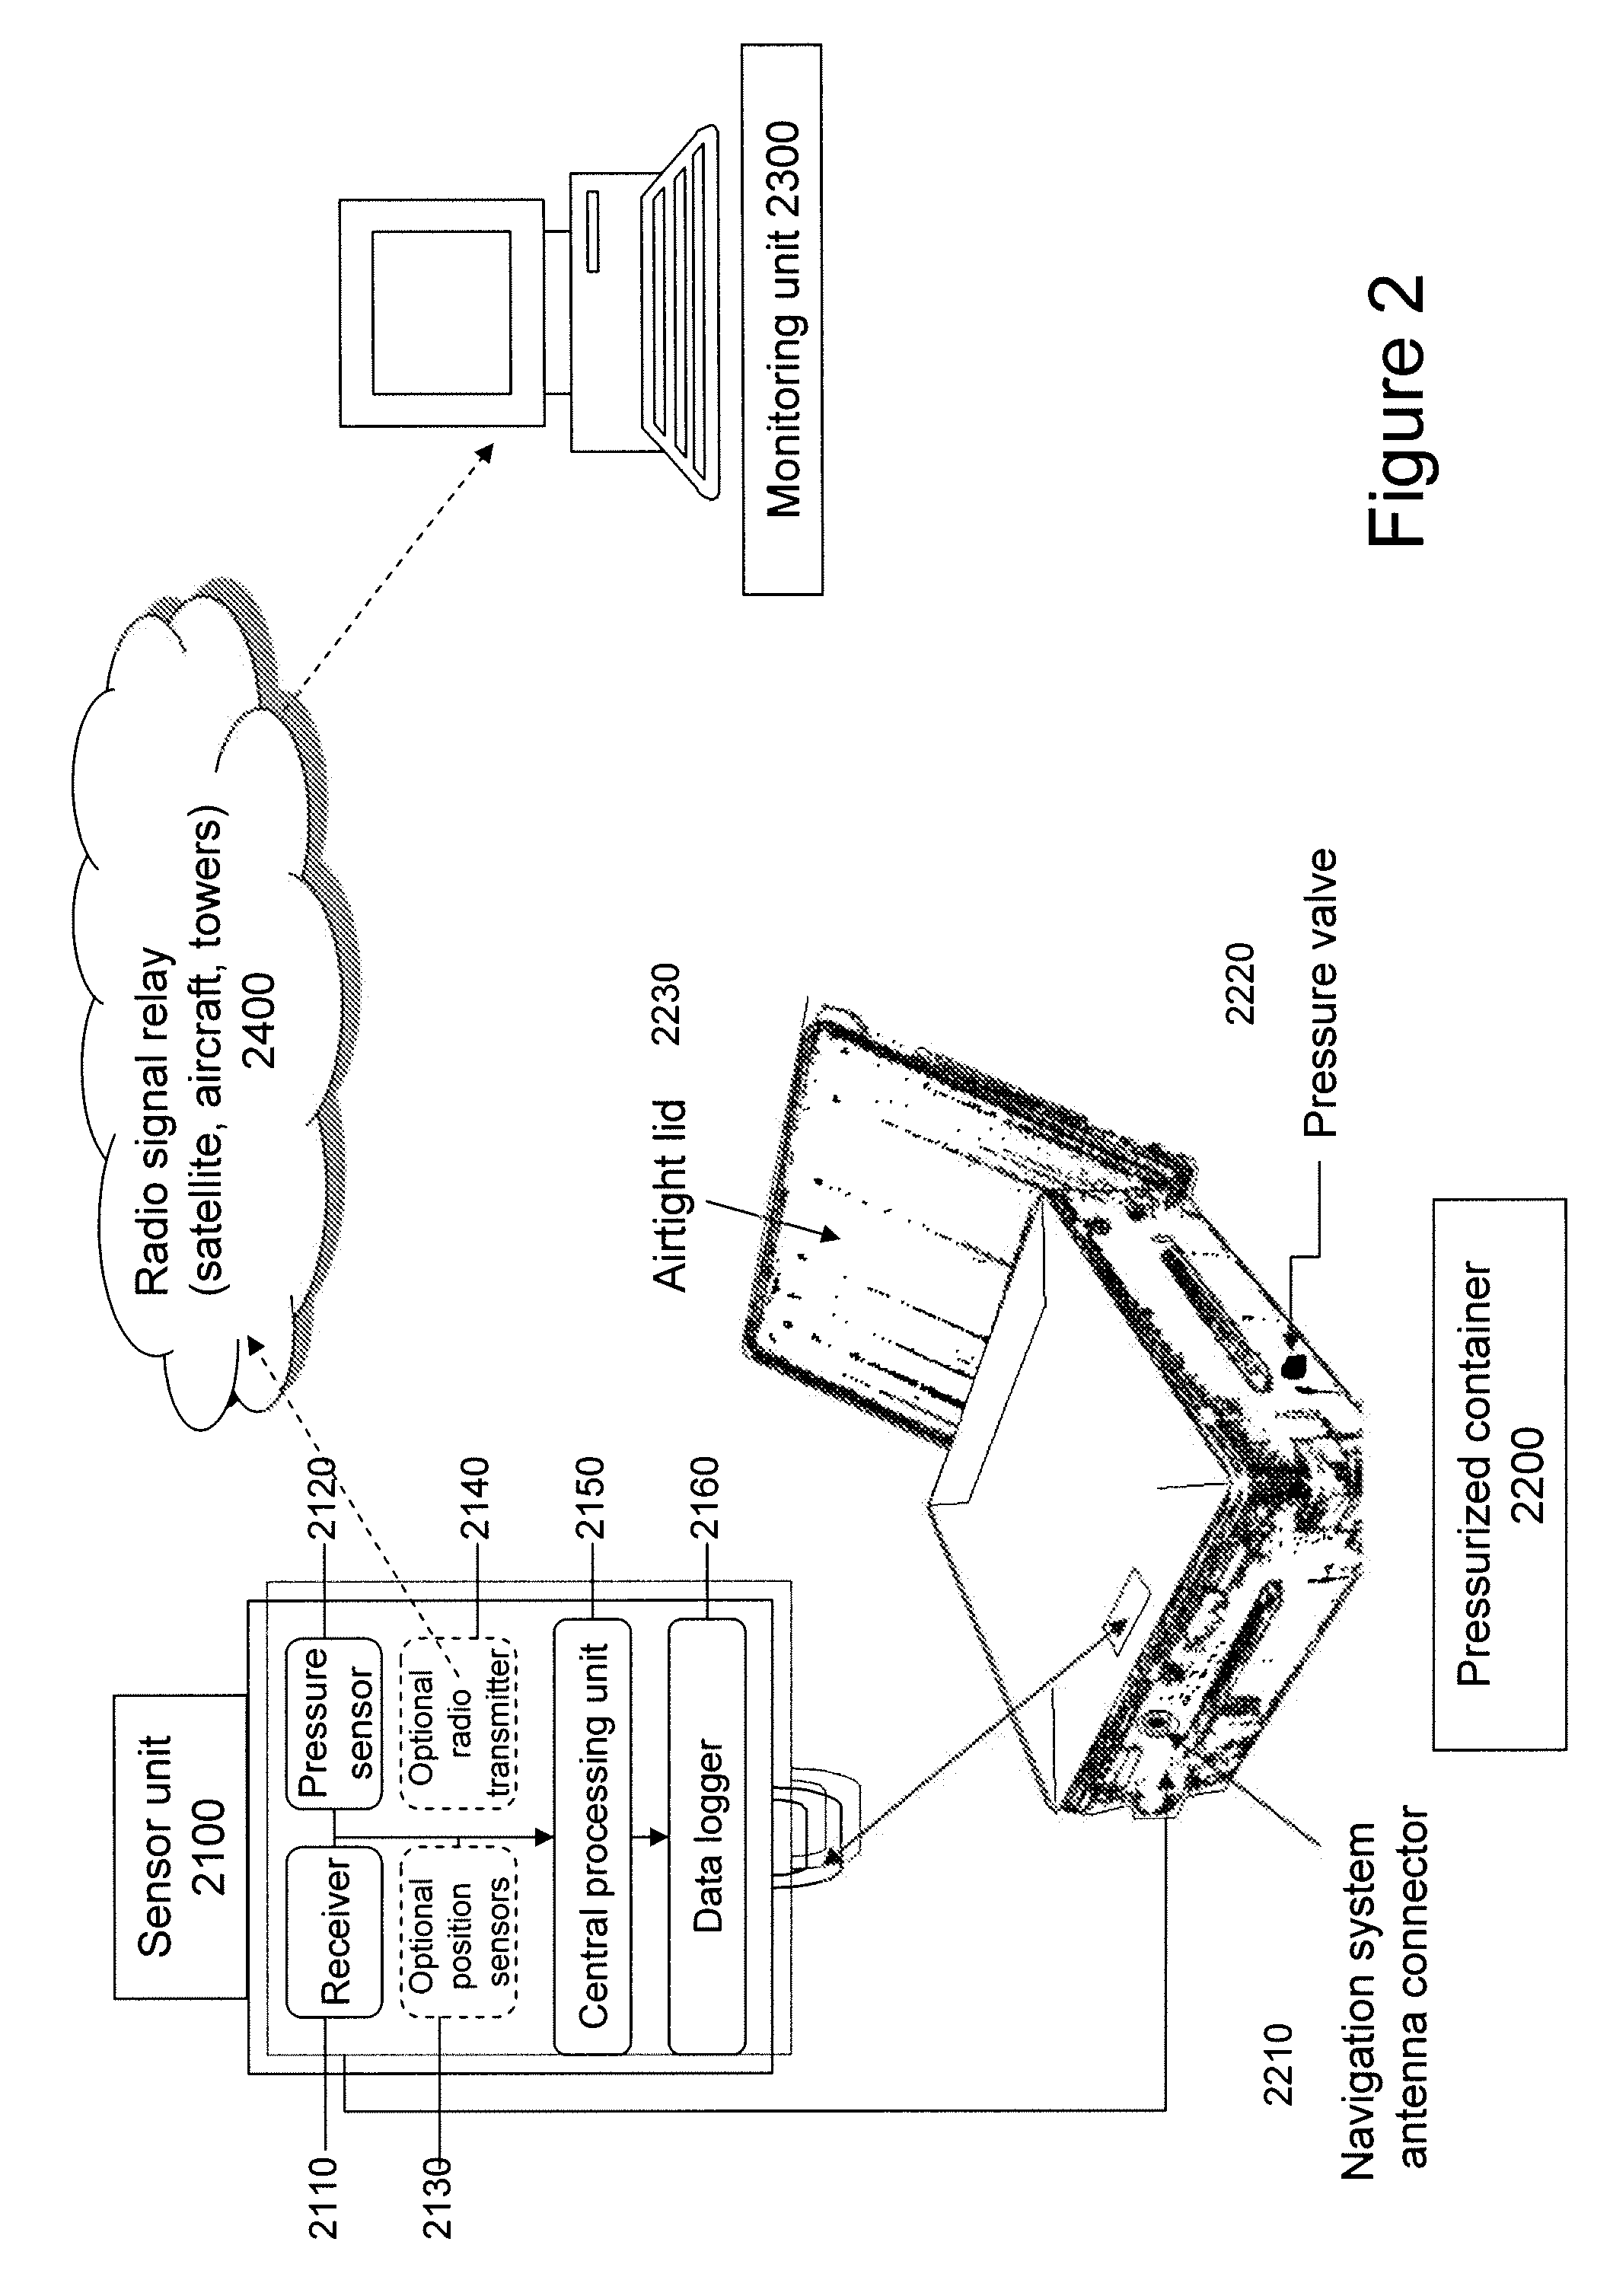 Method for verifying the integrity of a container